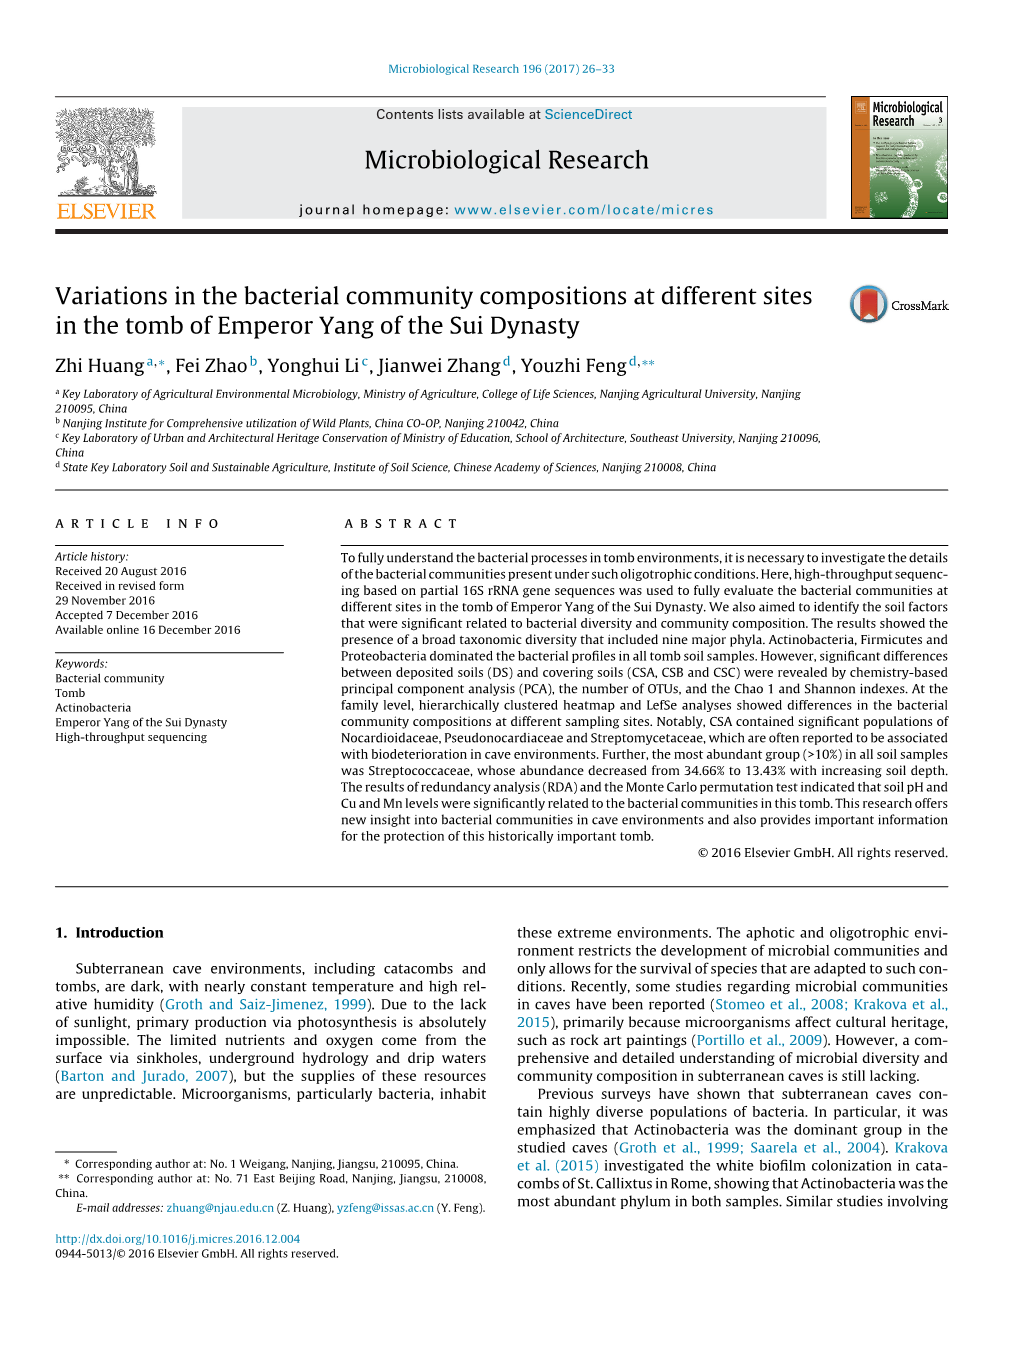 Variations in the Bacterial Community Compositions at Different Sites in The